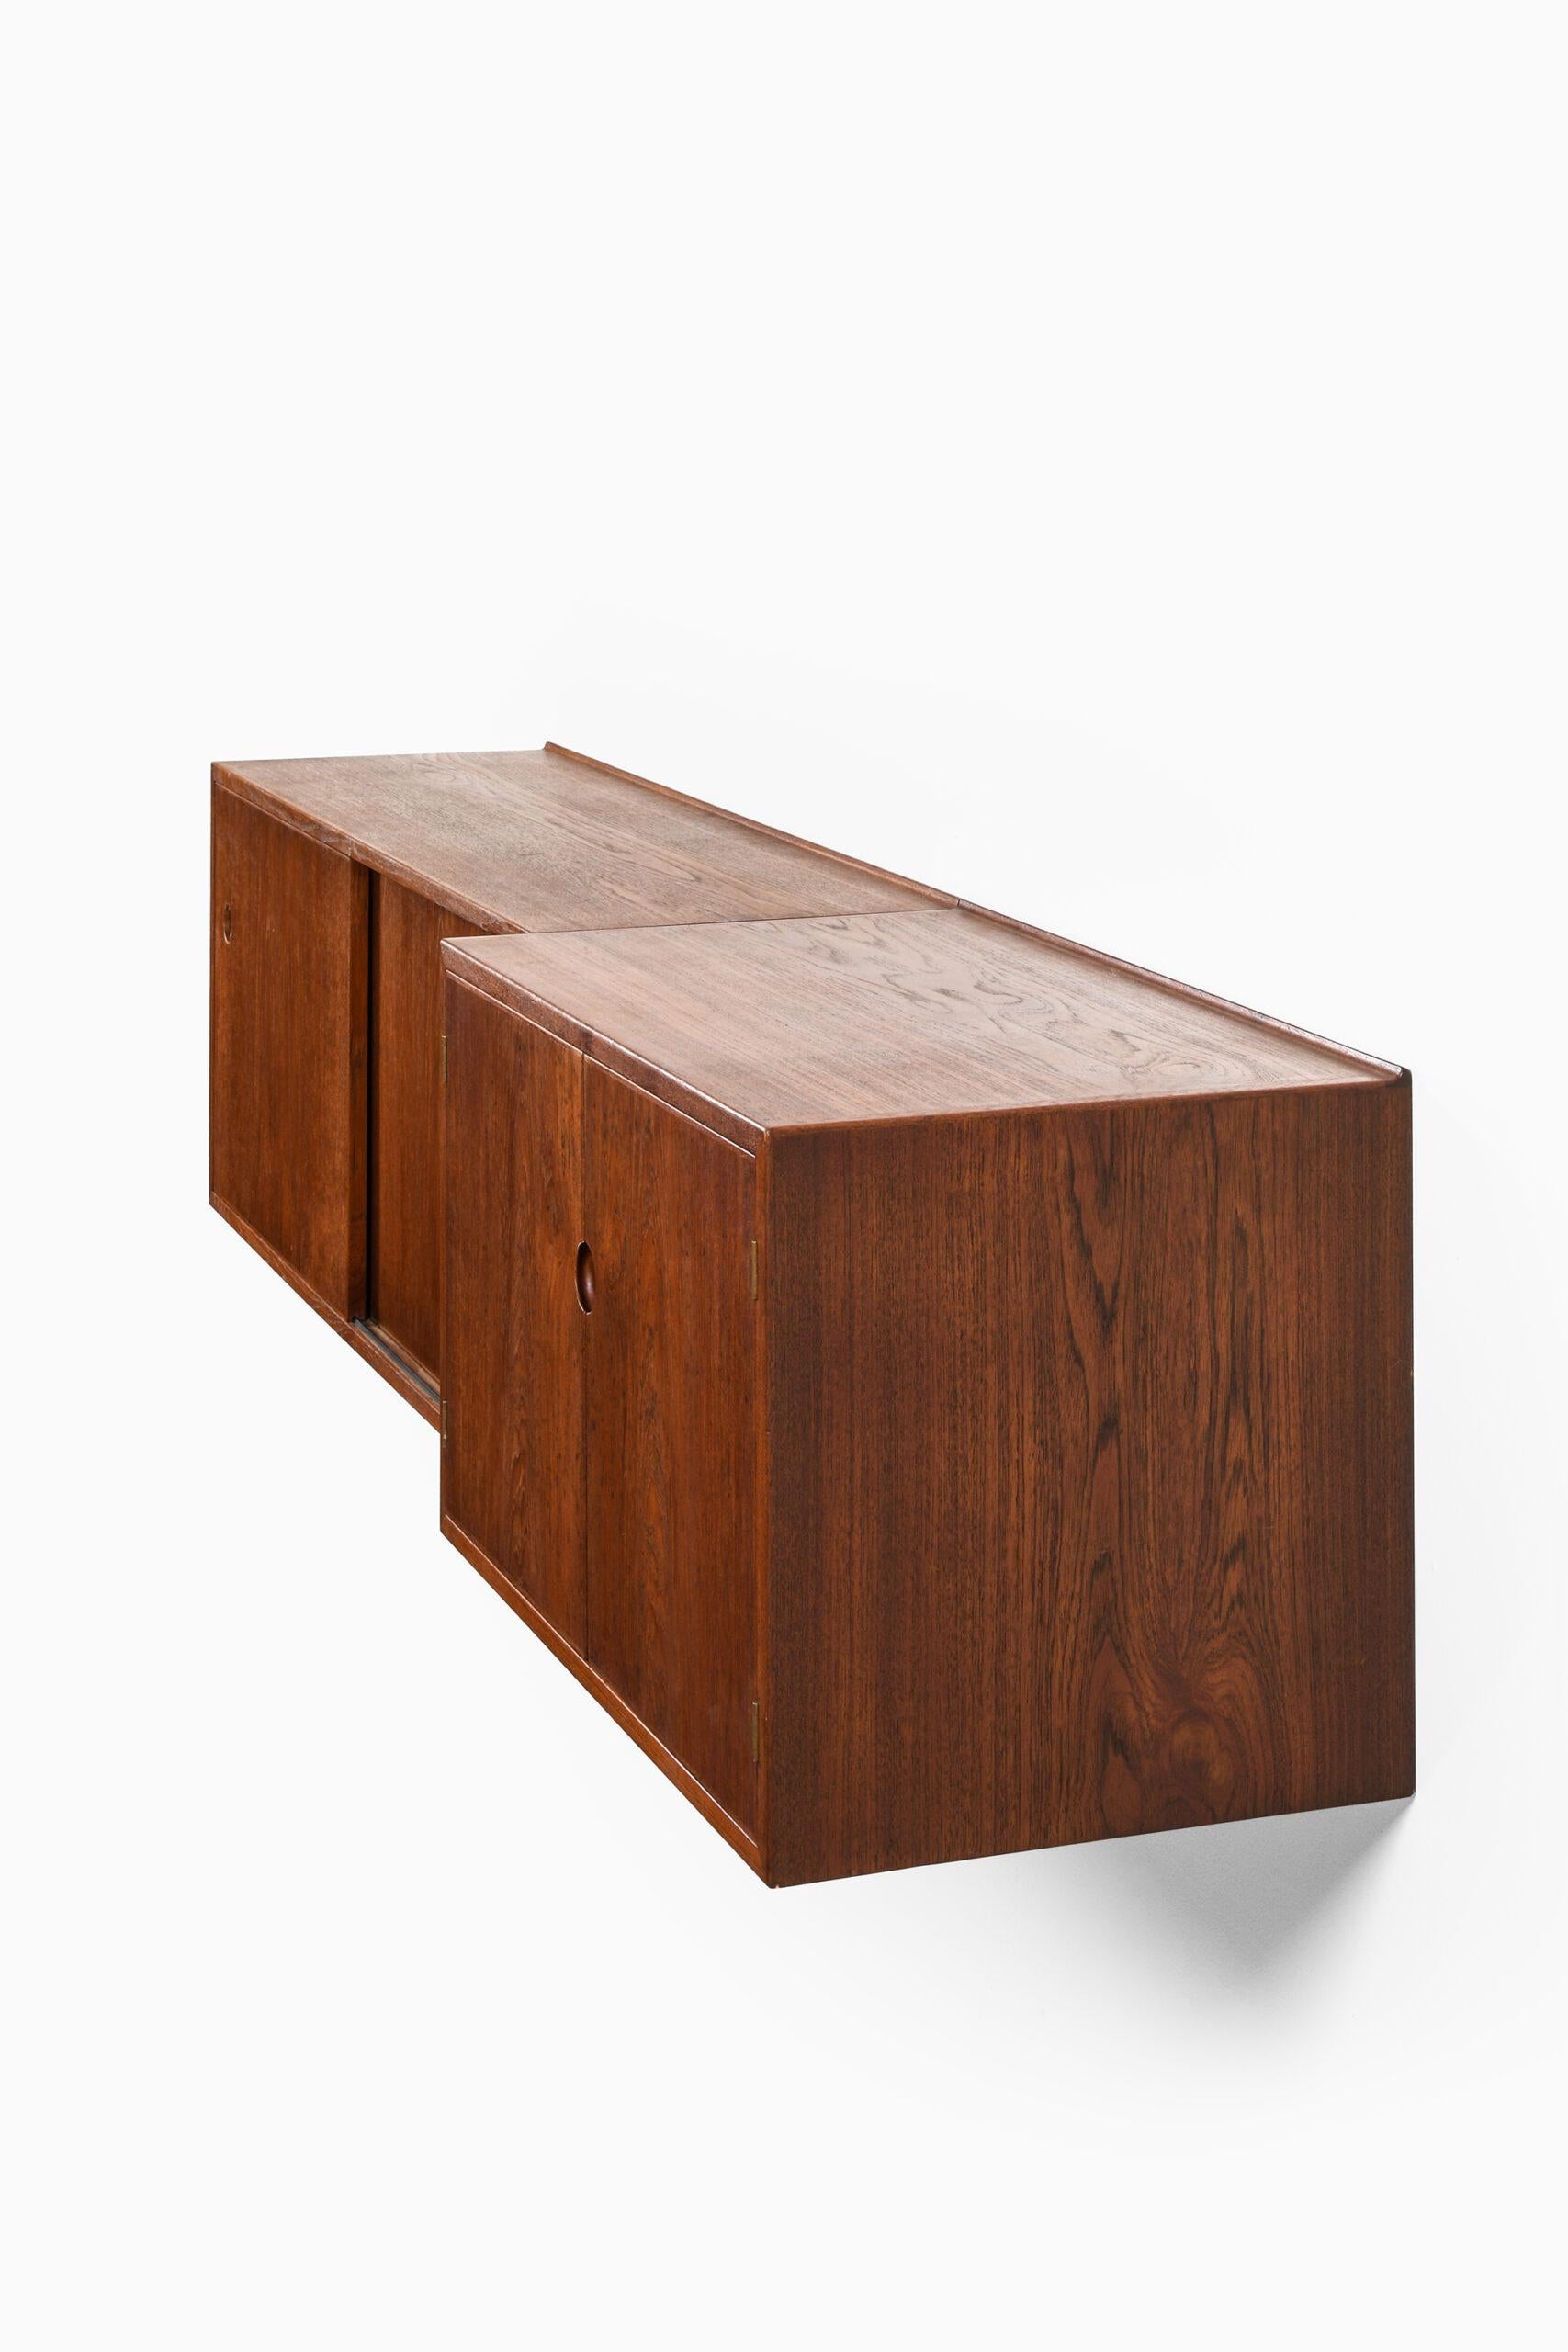 Mid-20th Century Hans Wegner Wall Mounted Sideboards Produced by Cabinetmaker Johannes Hansen For Sale